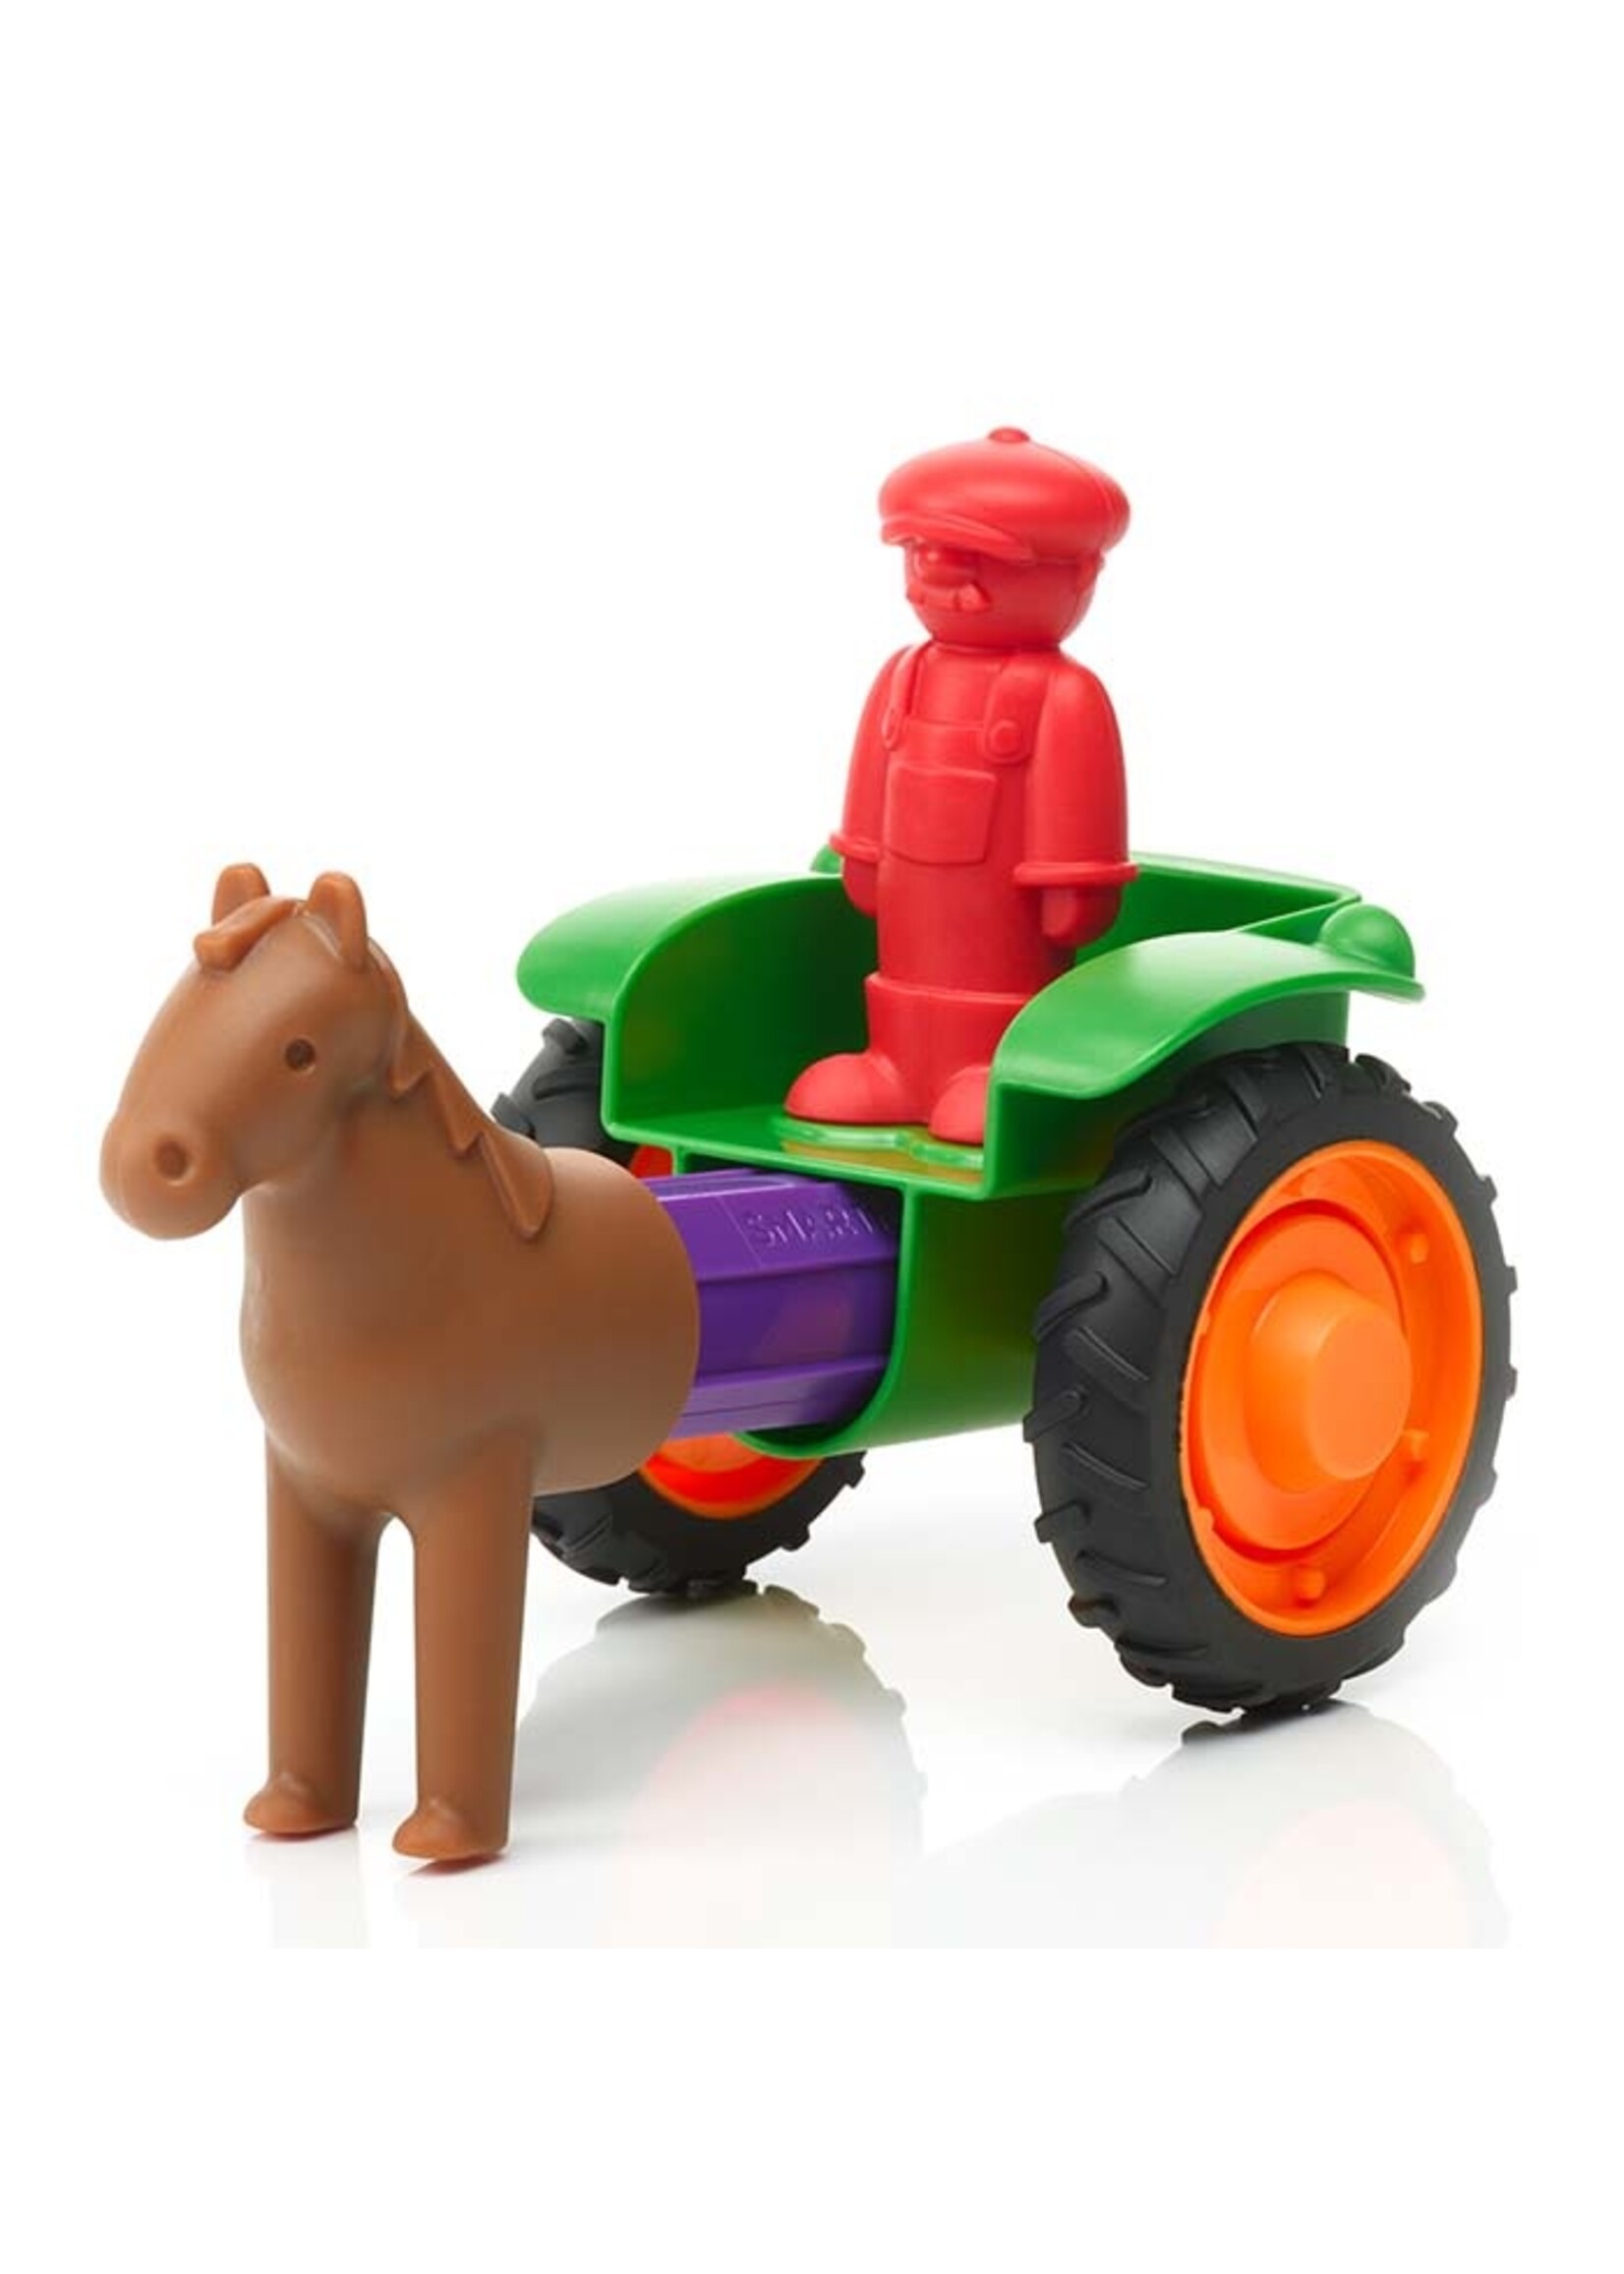 Smart Toys & Games My First Tractor - SmartMax